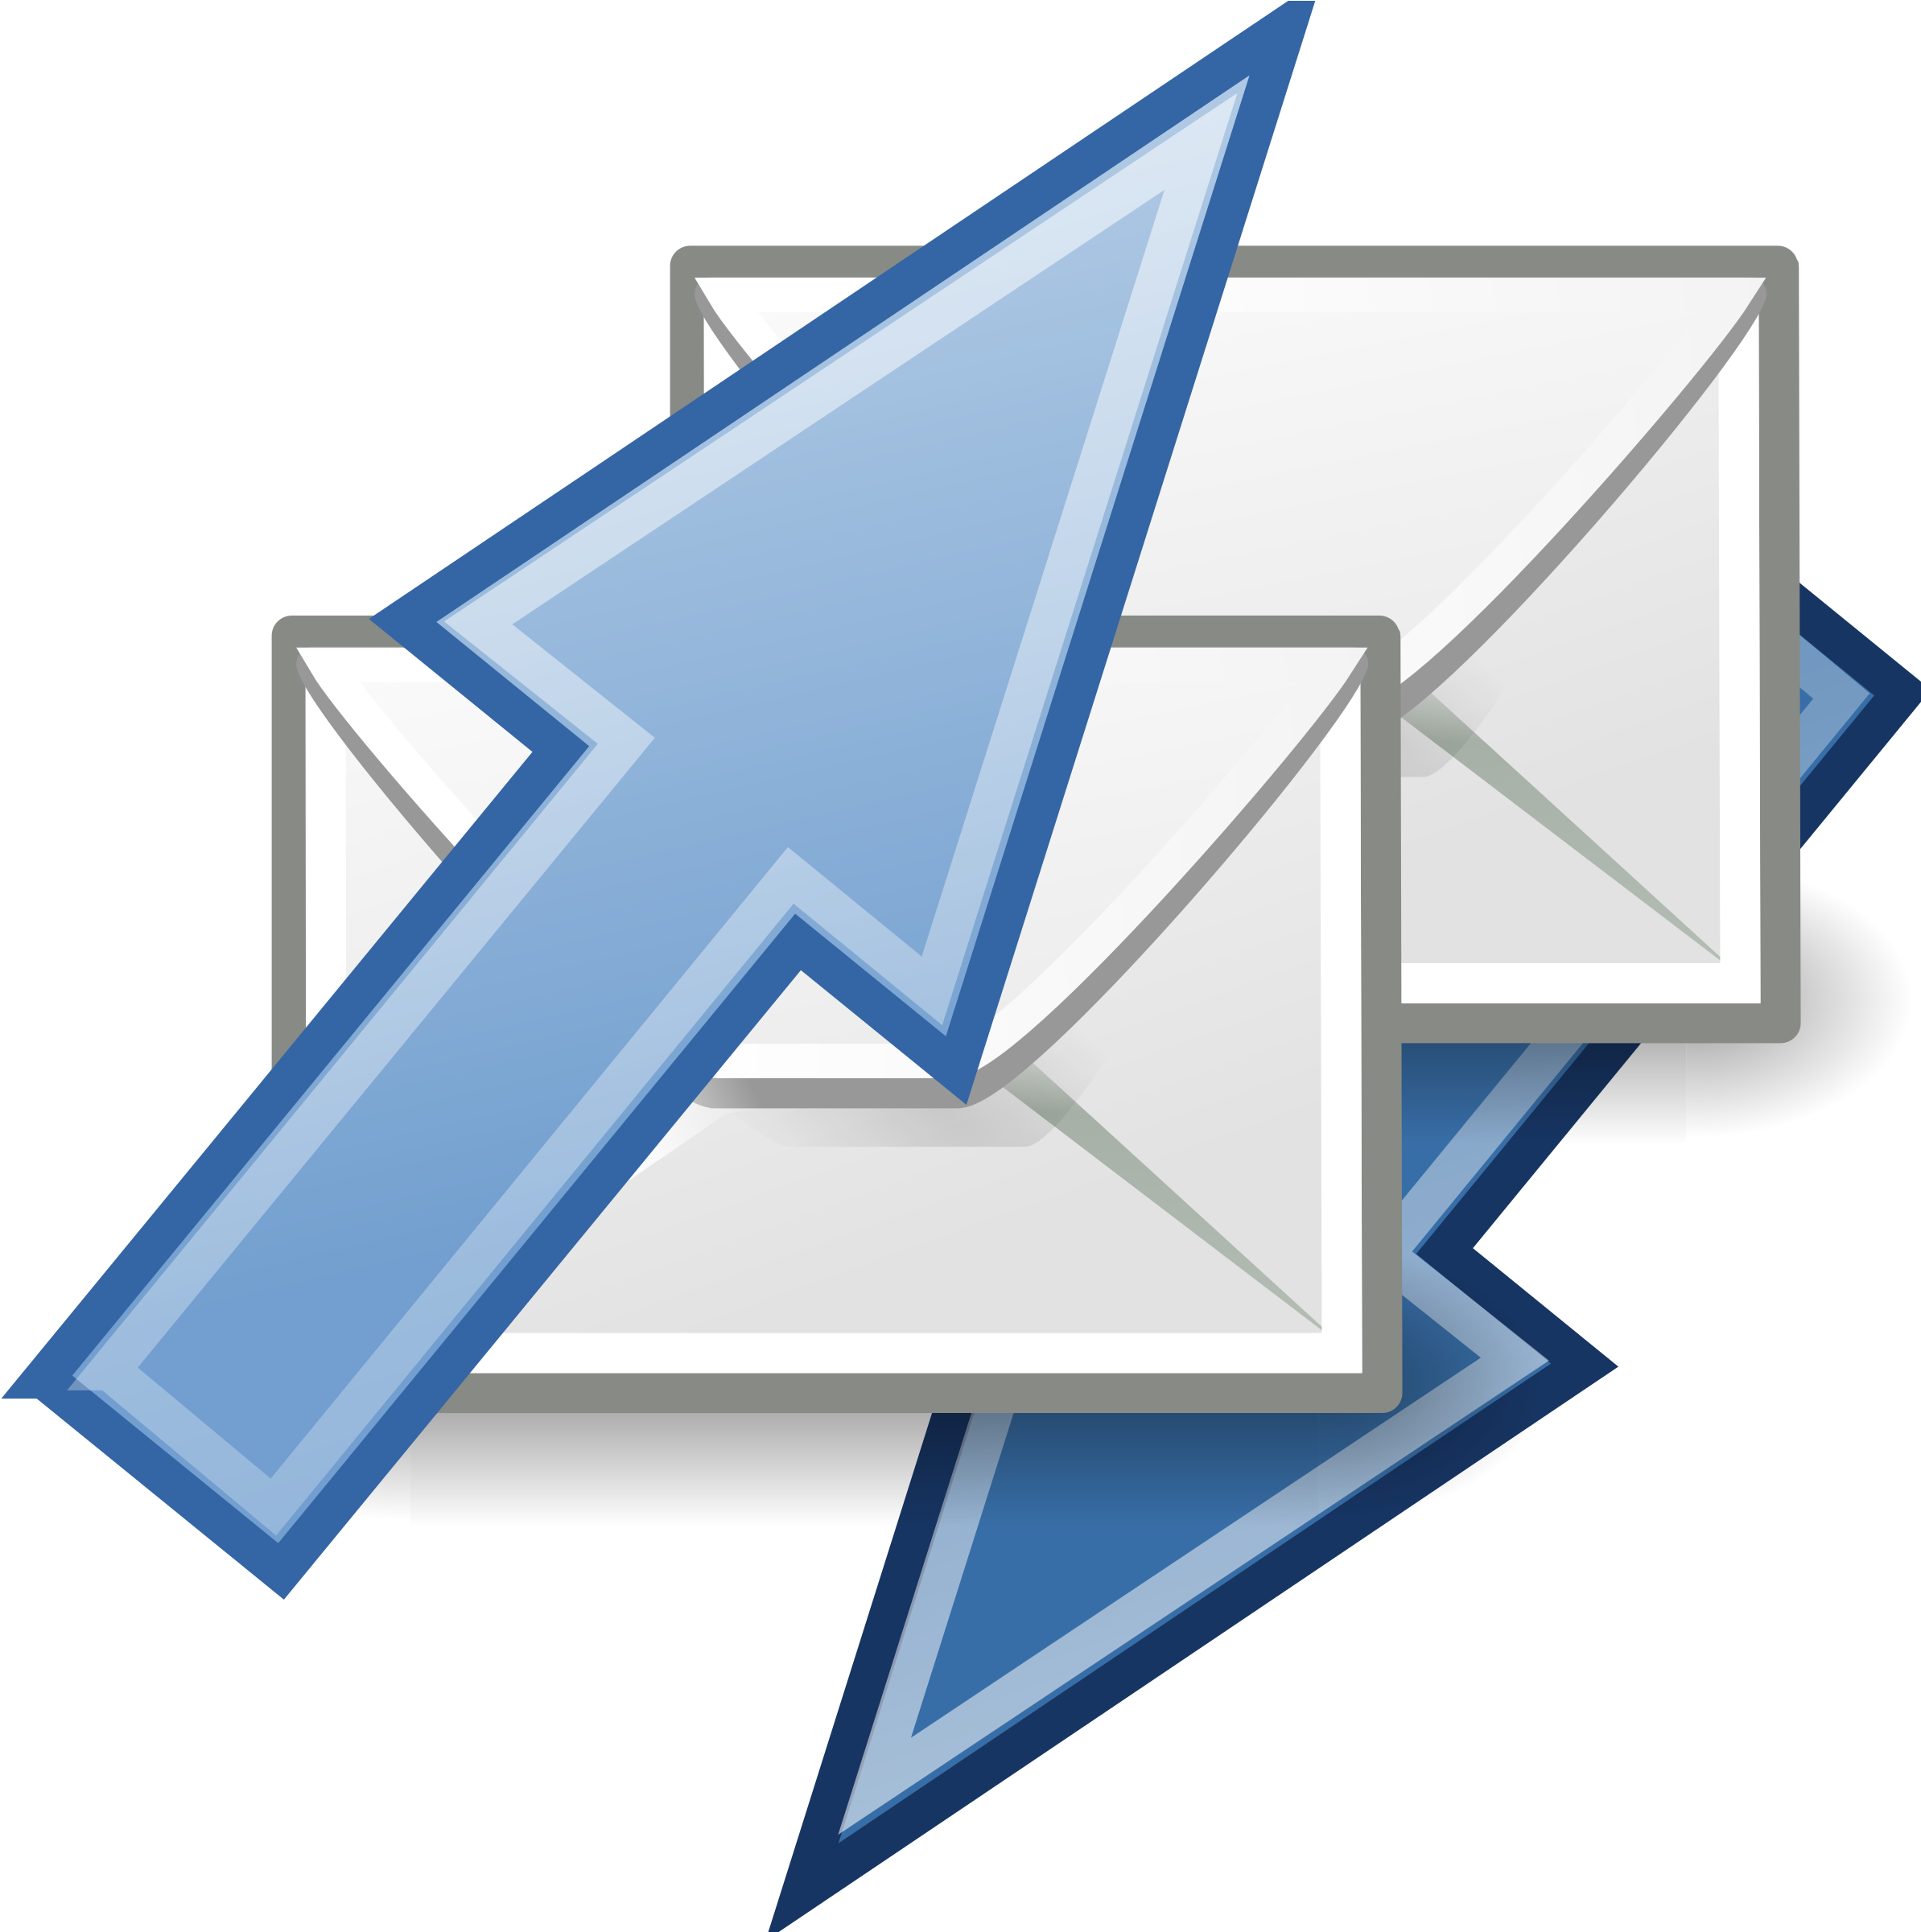 Send And Receive Email (2400x2400)